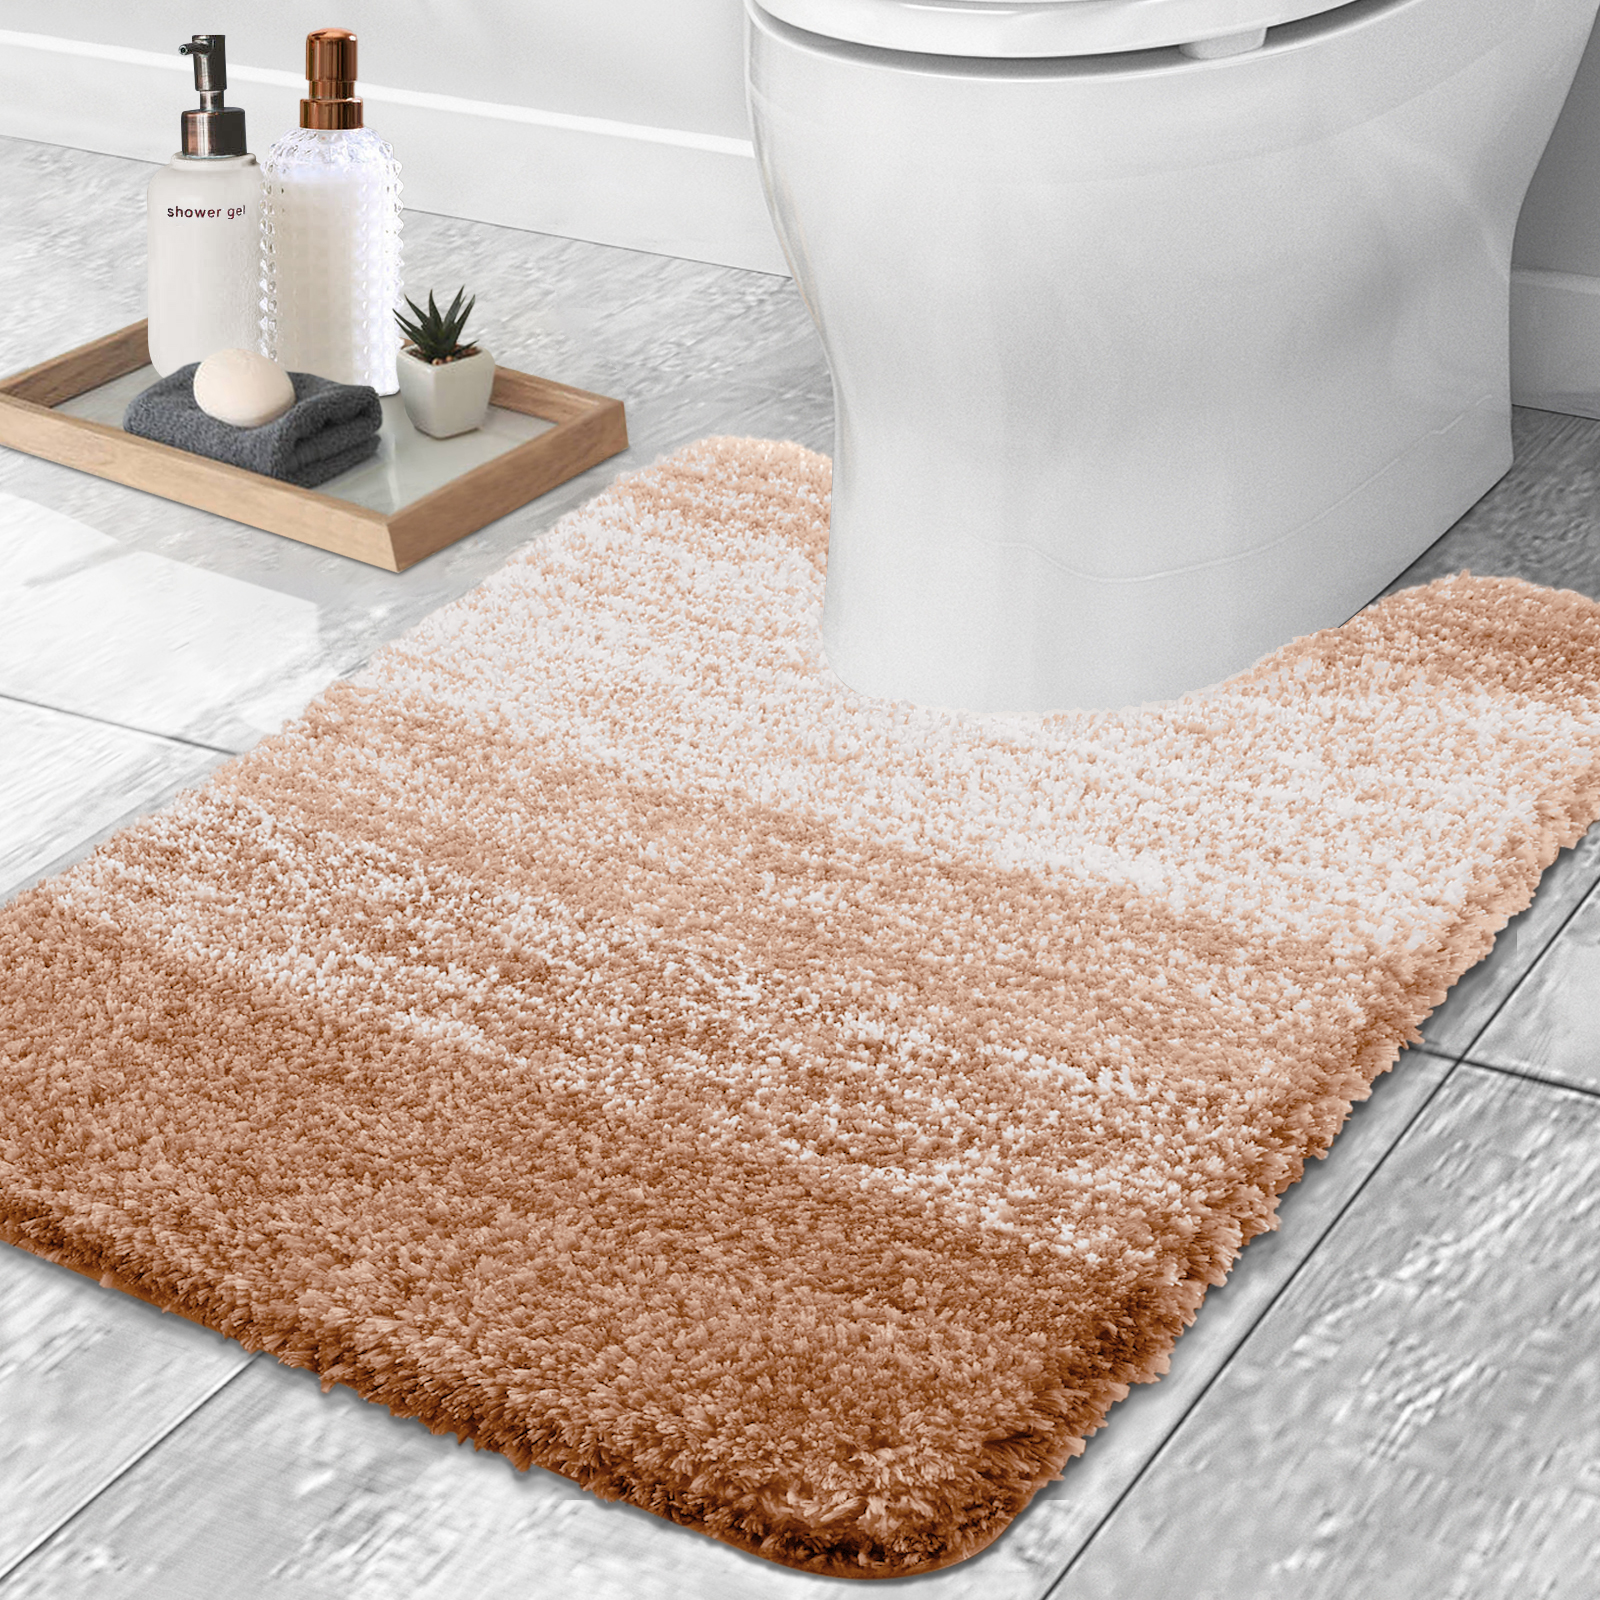 Buganda Luxury U-Shaped Bathroom Rugs, Super Soft and Absorbent Microfiber Toilet Bath Mats, Non-Slip Contour Bathroom Carpets with Rubber Backing, 20X24, Beige - image 1 of 7